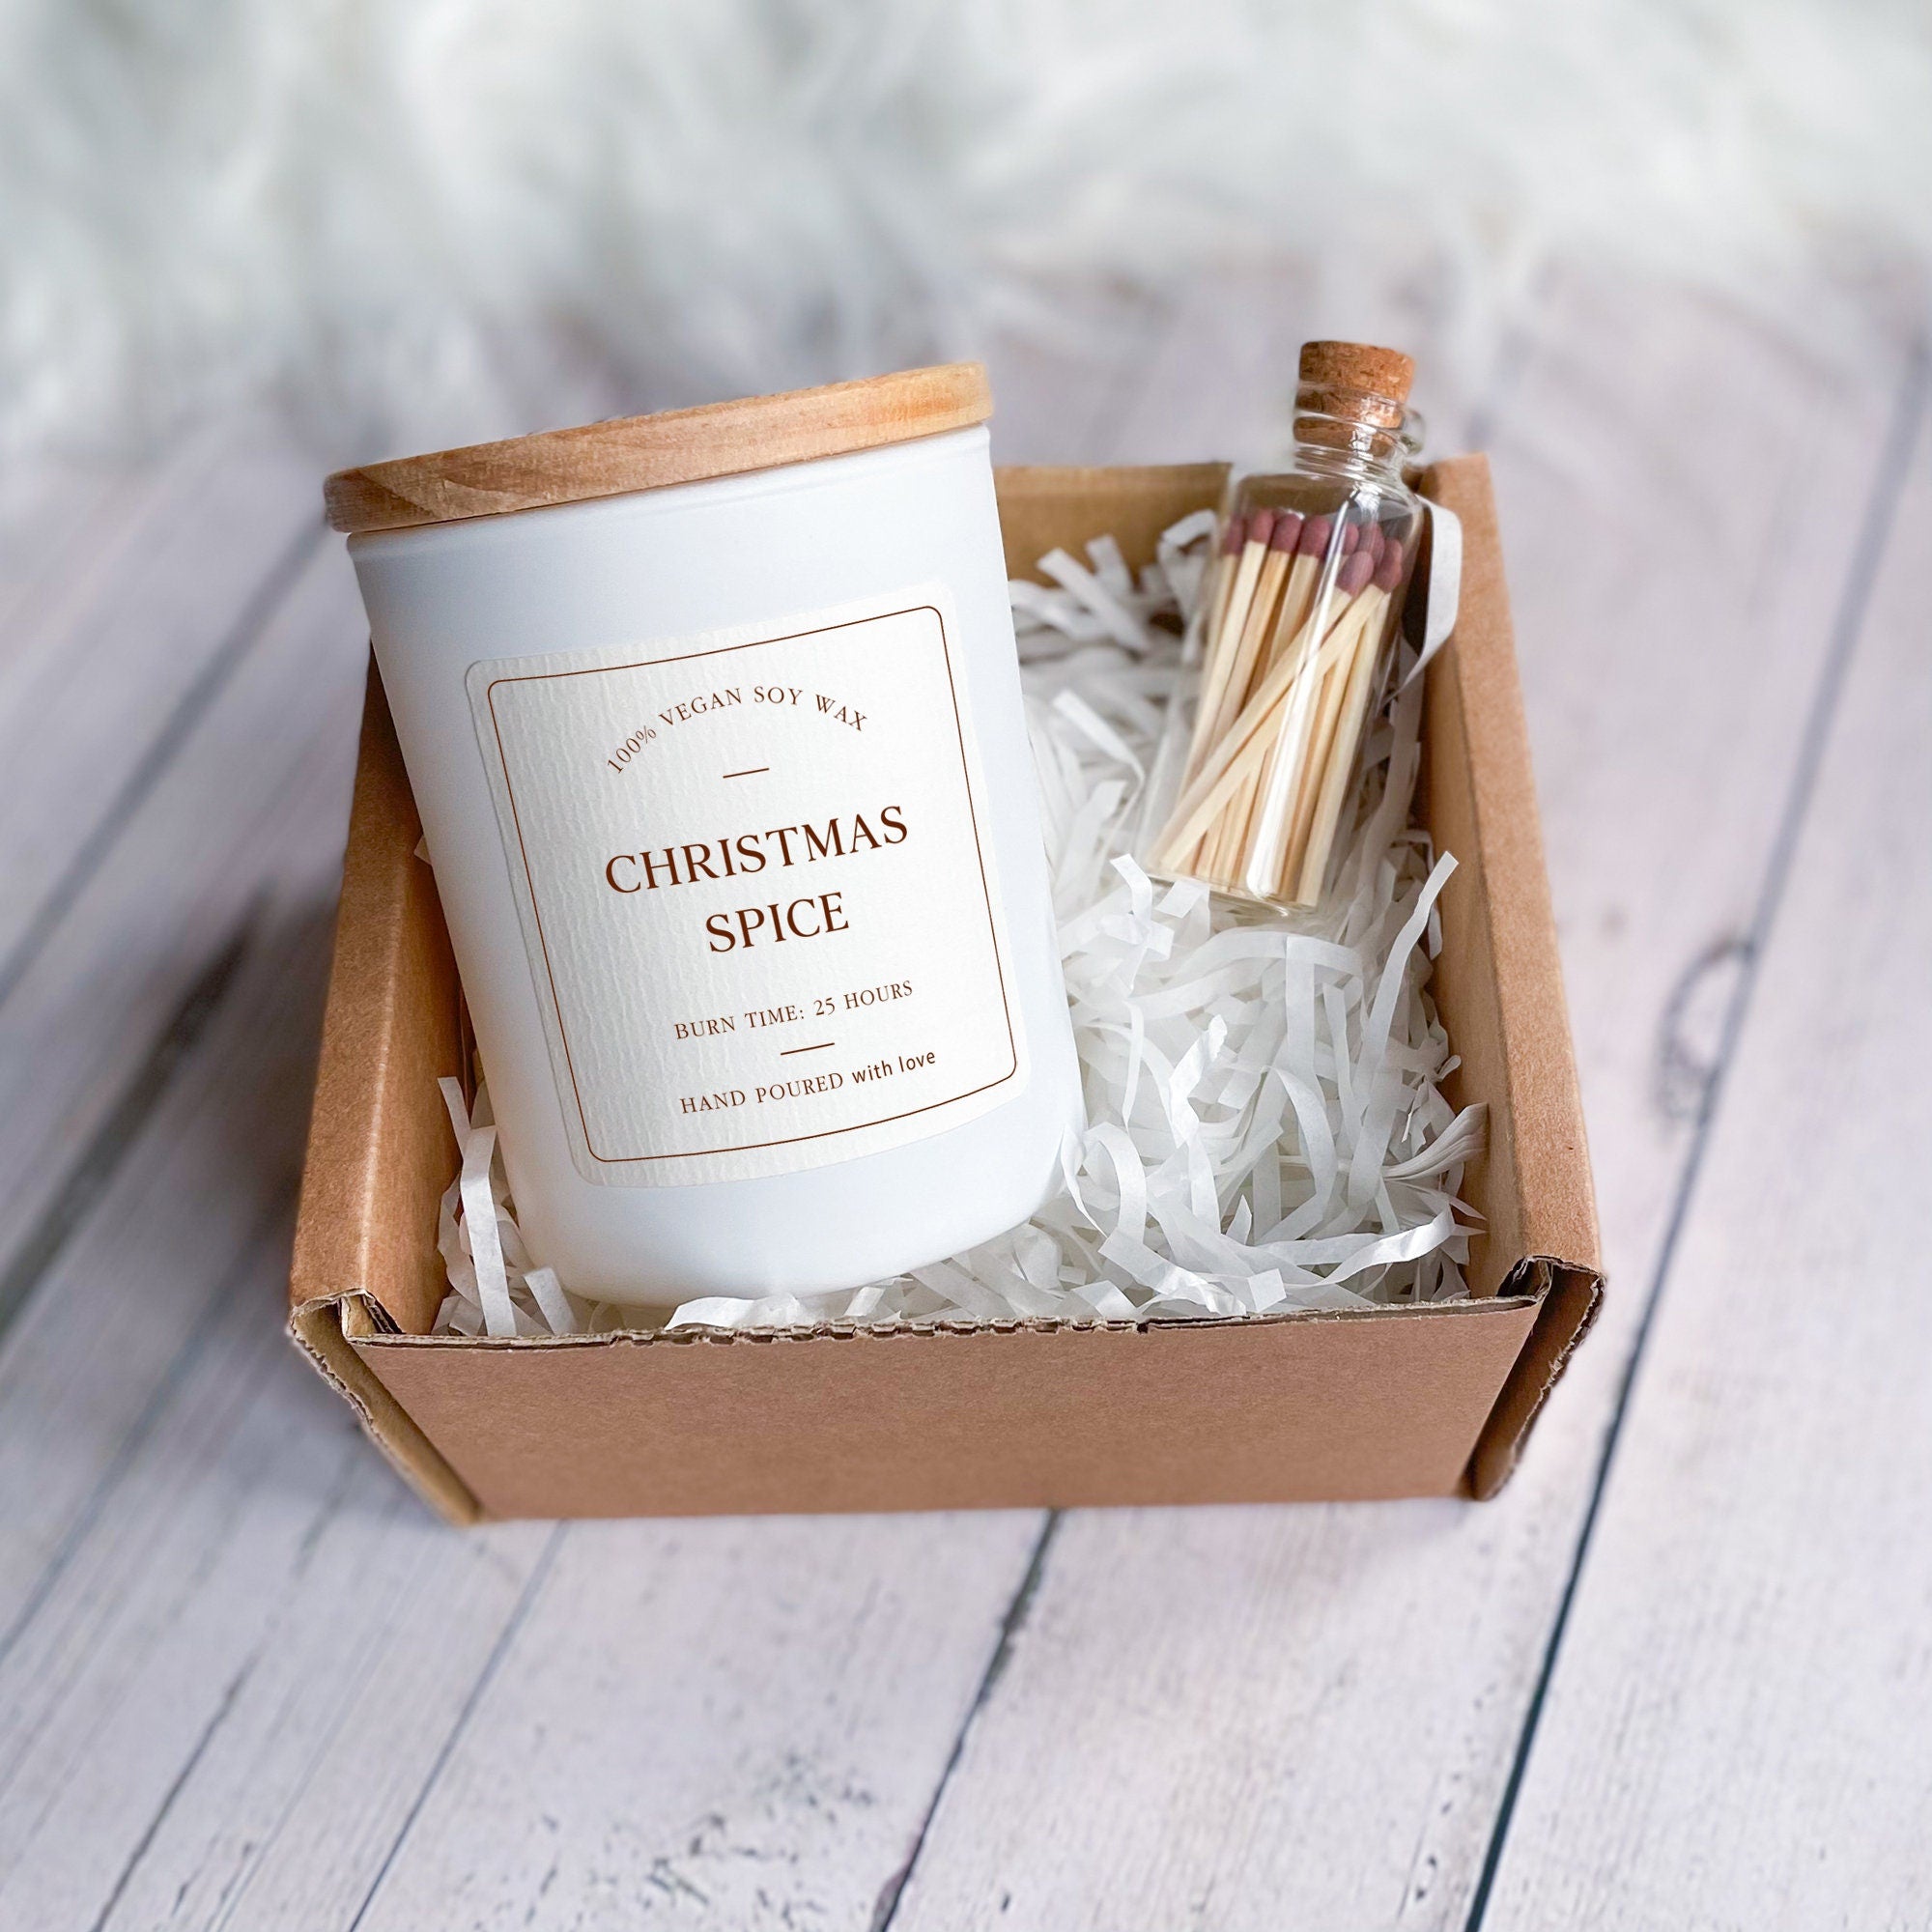 Scented candle with wooden lid and matches in a jar, Christmas Gift for Her, Christmas Spice Pumpkin Spice Gingerbread Holiday Candles happyinky